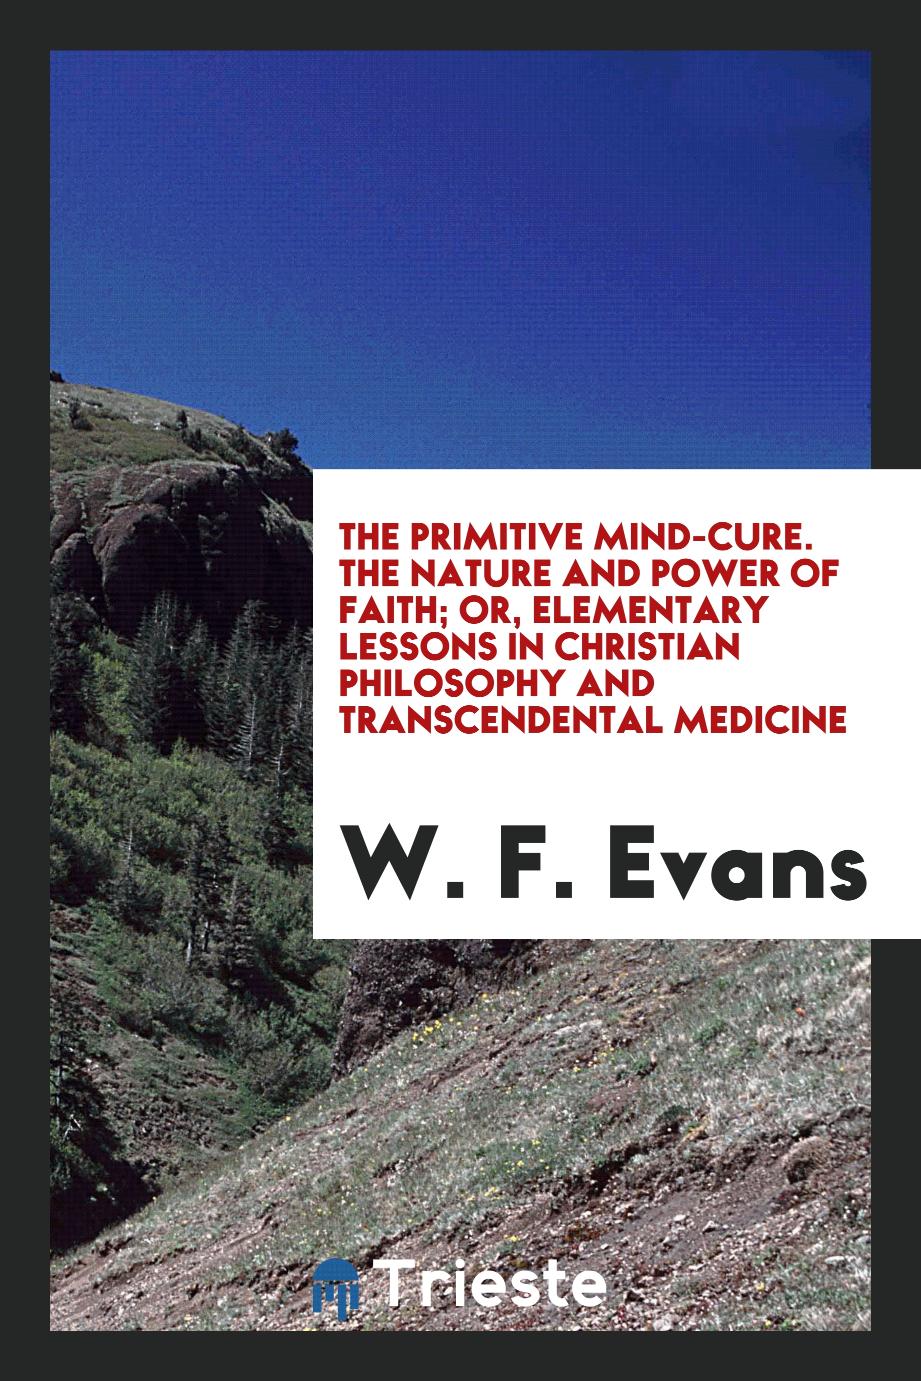 The Primitive Mind-Cure. The Nature and Power of Faith; Or, Elementary Lessons in Christian Philosophy and Transcendental Medicine